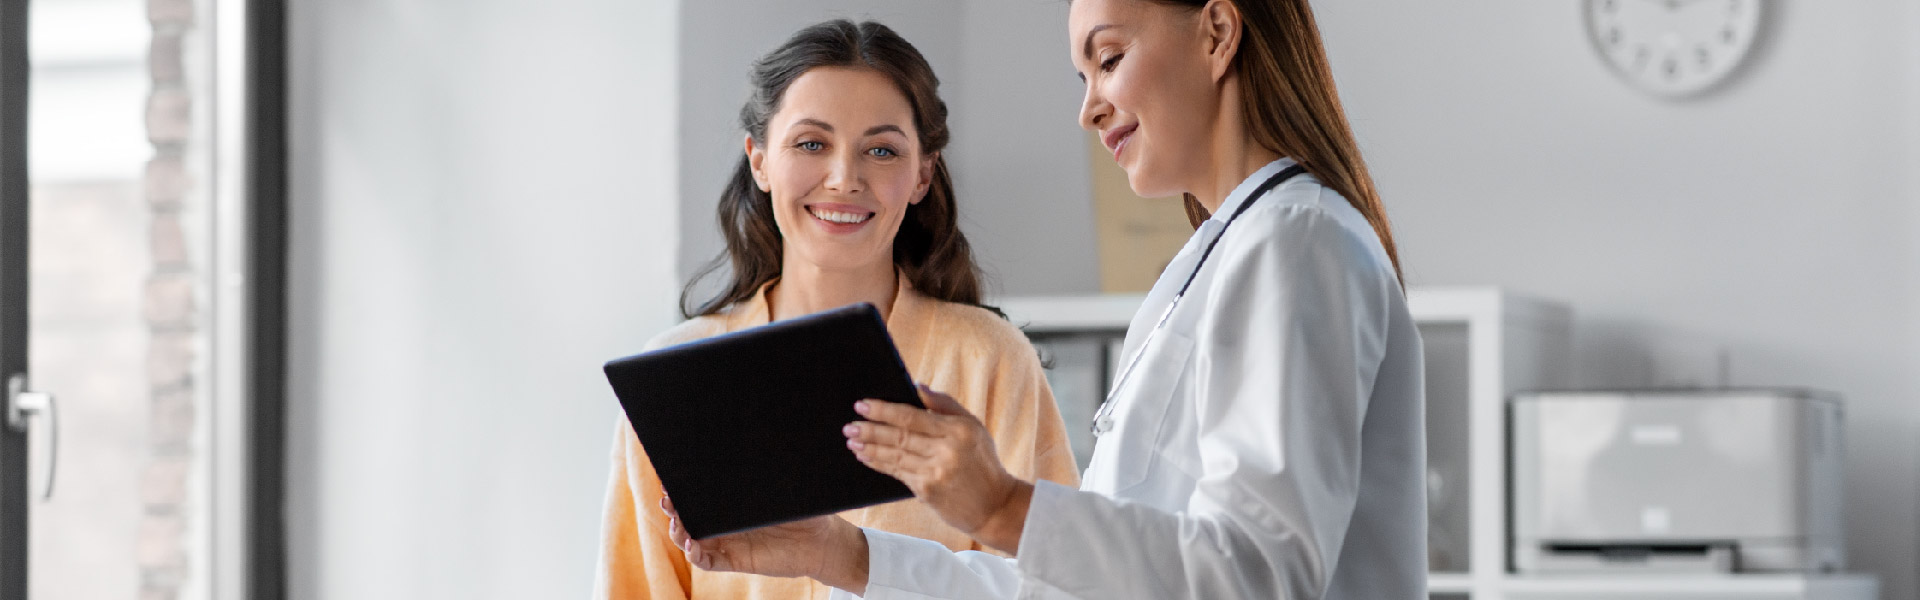 Kickstart your journey to paperless healthcare with DrySign e-signatures.